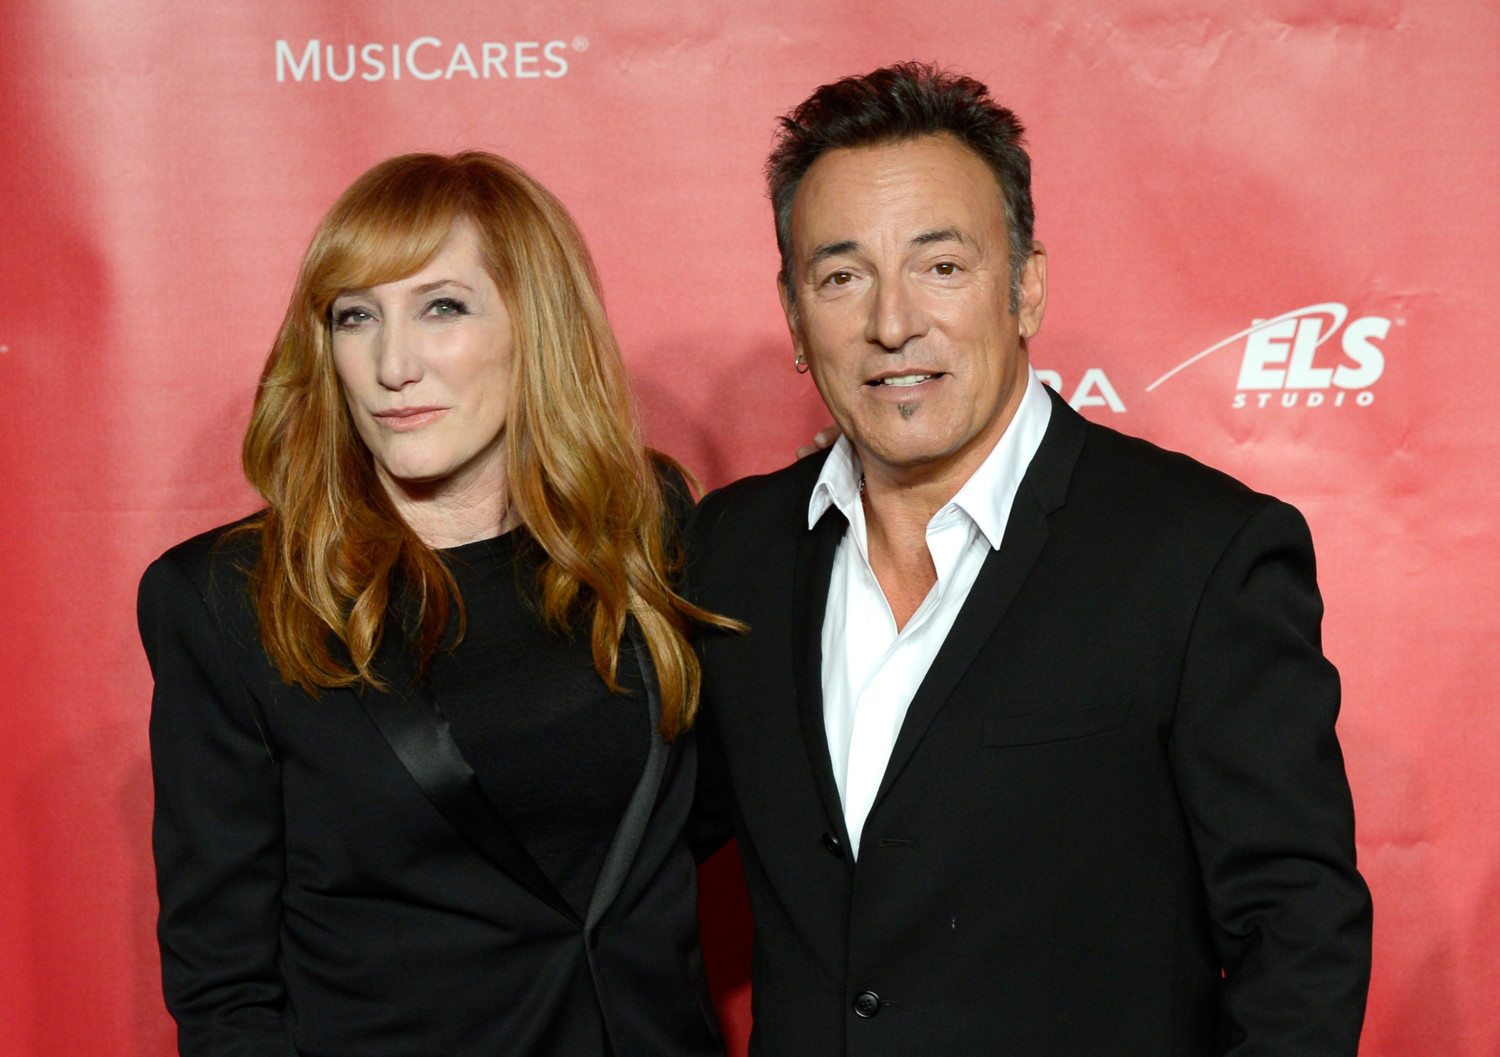 The 2013 MusiCares Person Of The Year Gala Honoring Bruce Springsteen - Arrivals